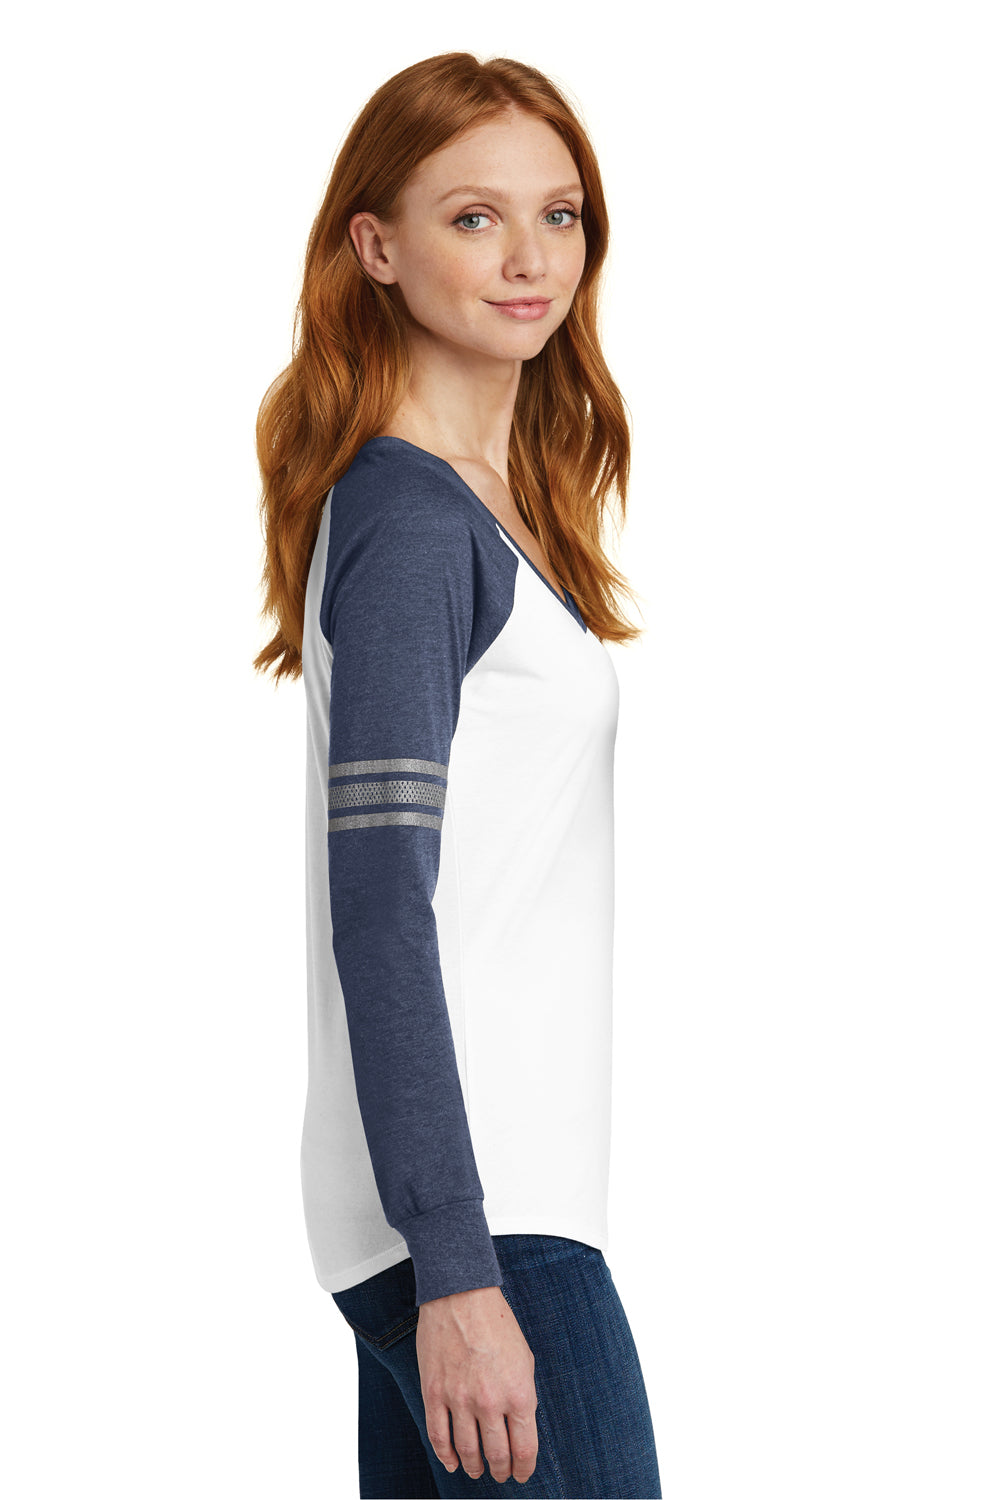 District DM477 Womens Game Long Sleeve V-Neck T-Shirt White/Heather Navy Blue/Silver Grey Side